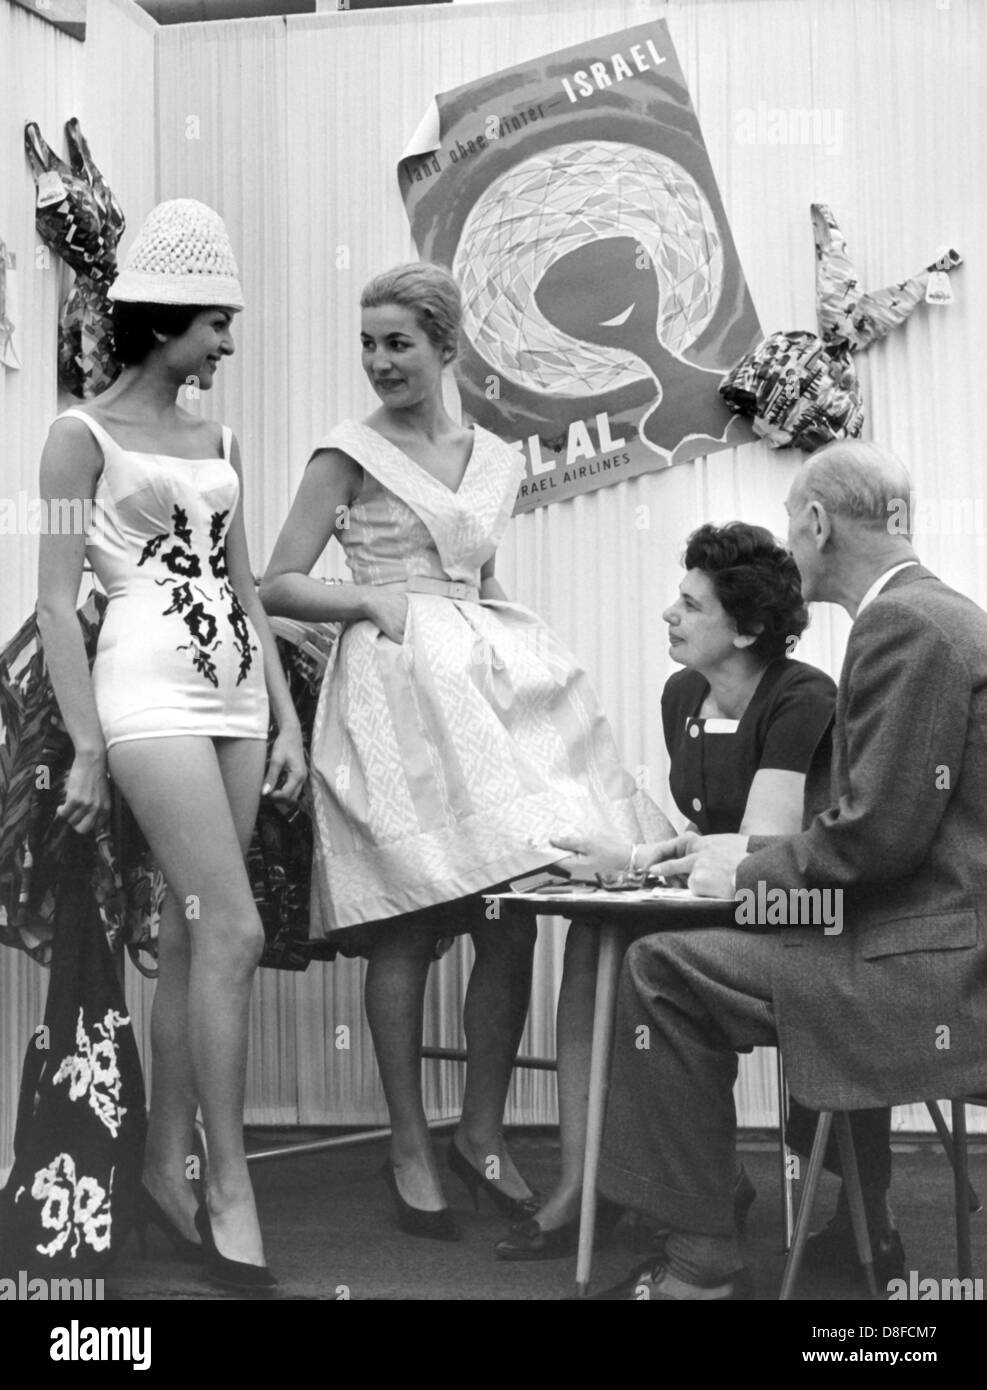 For the first time, exhibitors from Israel are guests of the International Fashion Week of the women's wear industry in Duesseldorf in 1961. They show beach fashion. Photo: Wolfgang Hub. Stock Photo